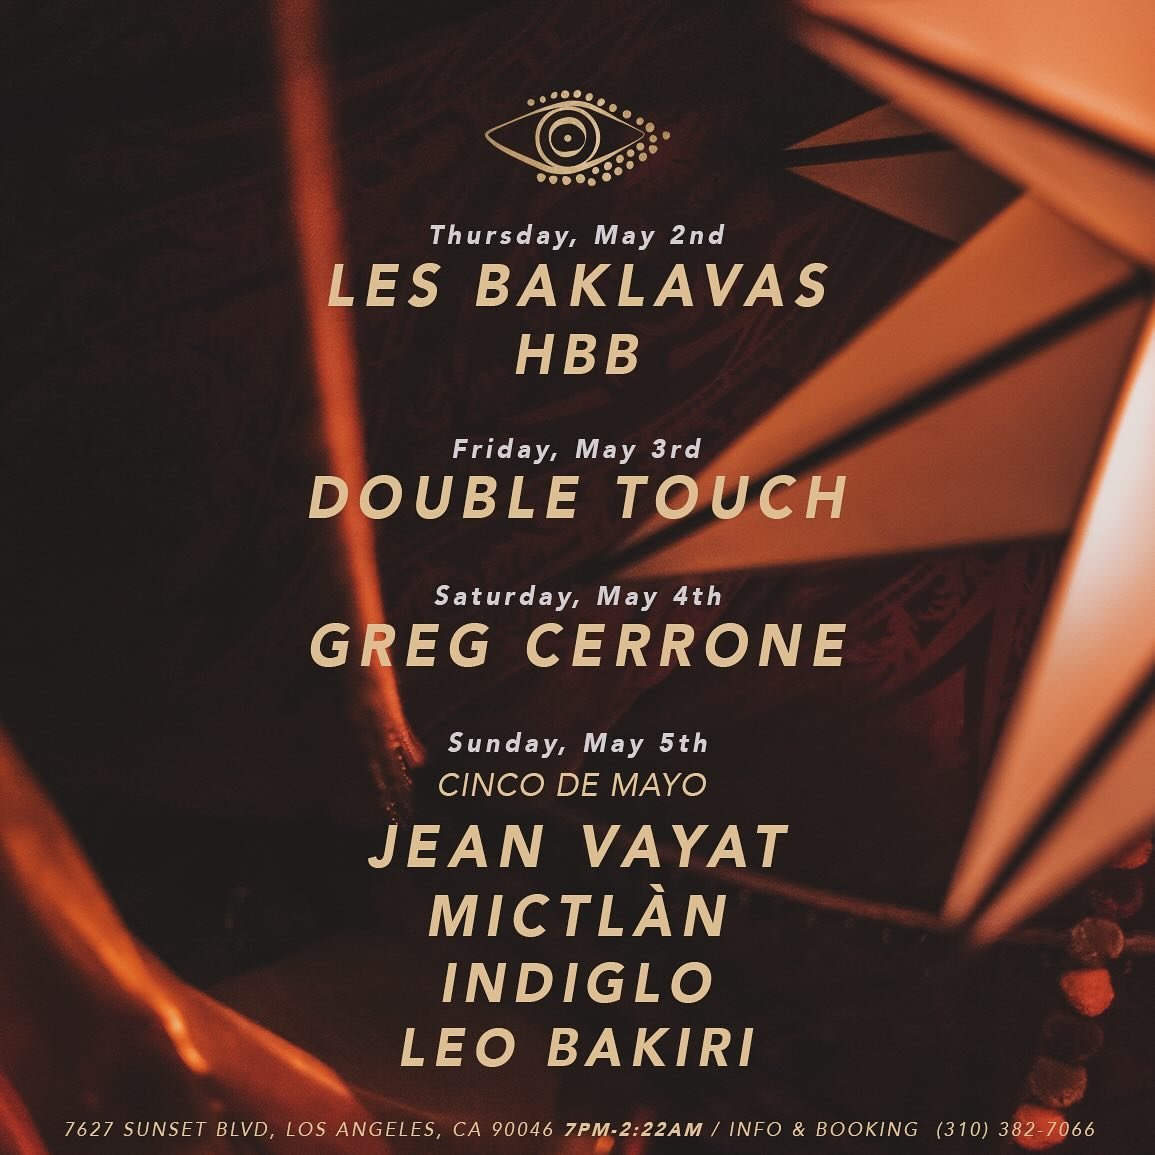 Kicking off May at @members__love with a special lineup 🫦

Thursday : @lesbaklavas &amp; @dj_hbb 

Friday : @doubletouchofficial 

Saturday : @gregcerrone 

Sunday - Cinco De Mayo : @jean_vayat | @djmictlan | @_indiglo | Leo Bakari

Link in our bio 